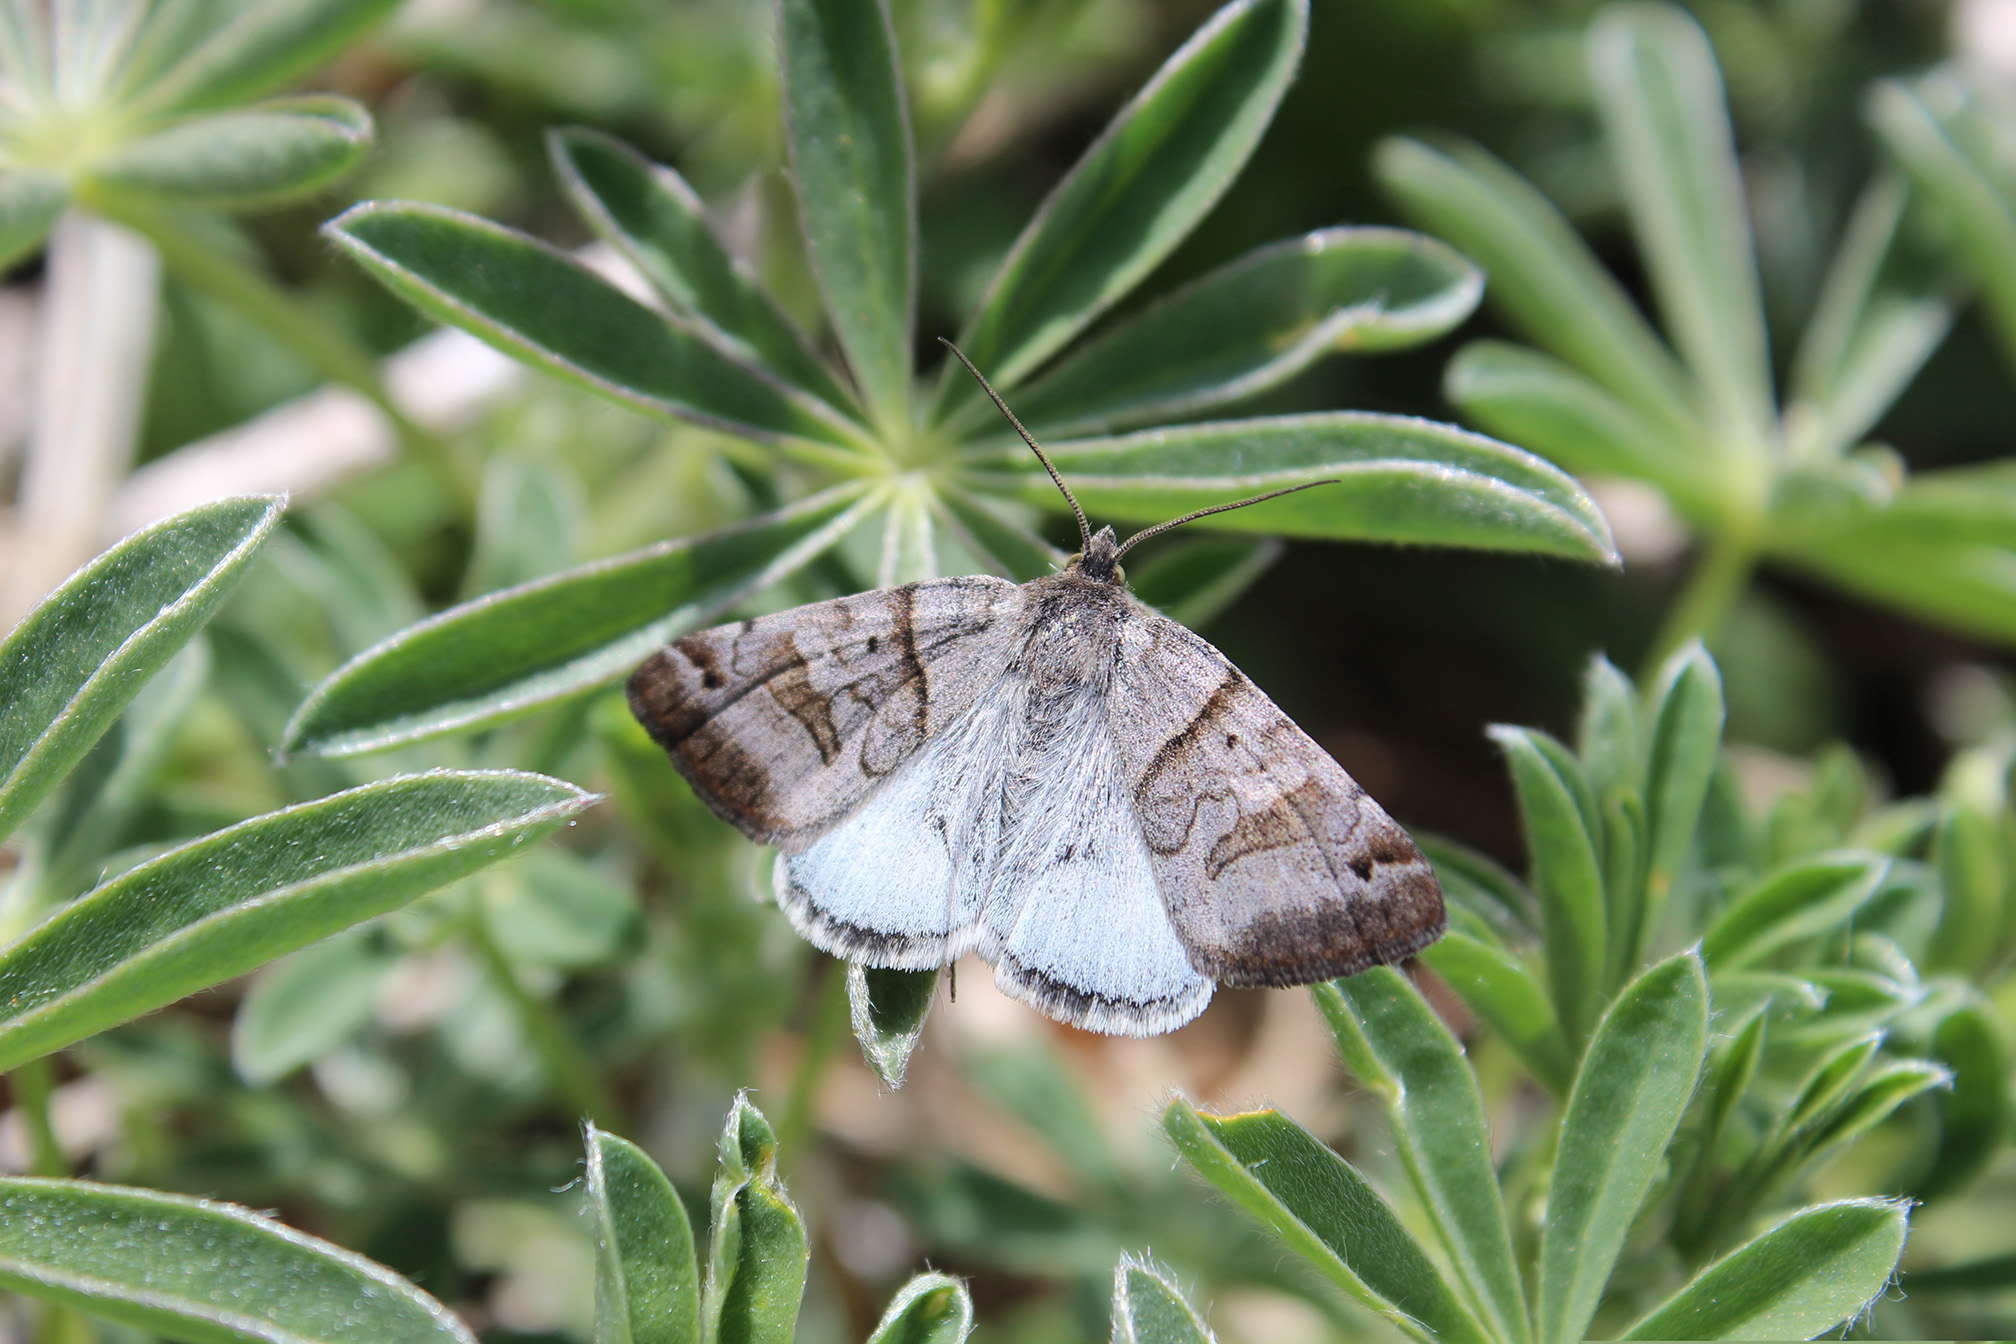 A small moth with intricate patterns in shades of pale and dark brown rests on gray-green leaves